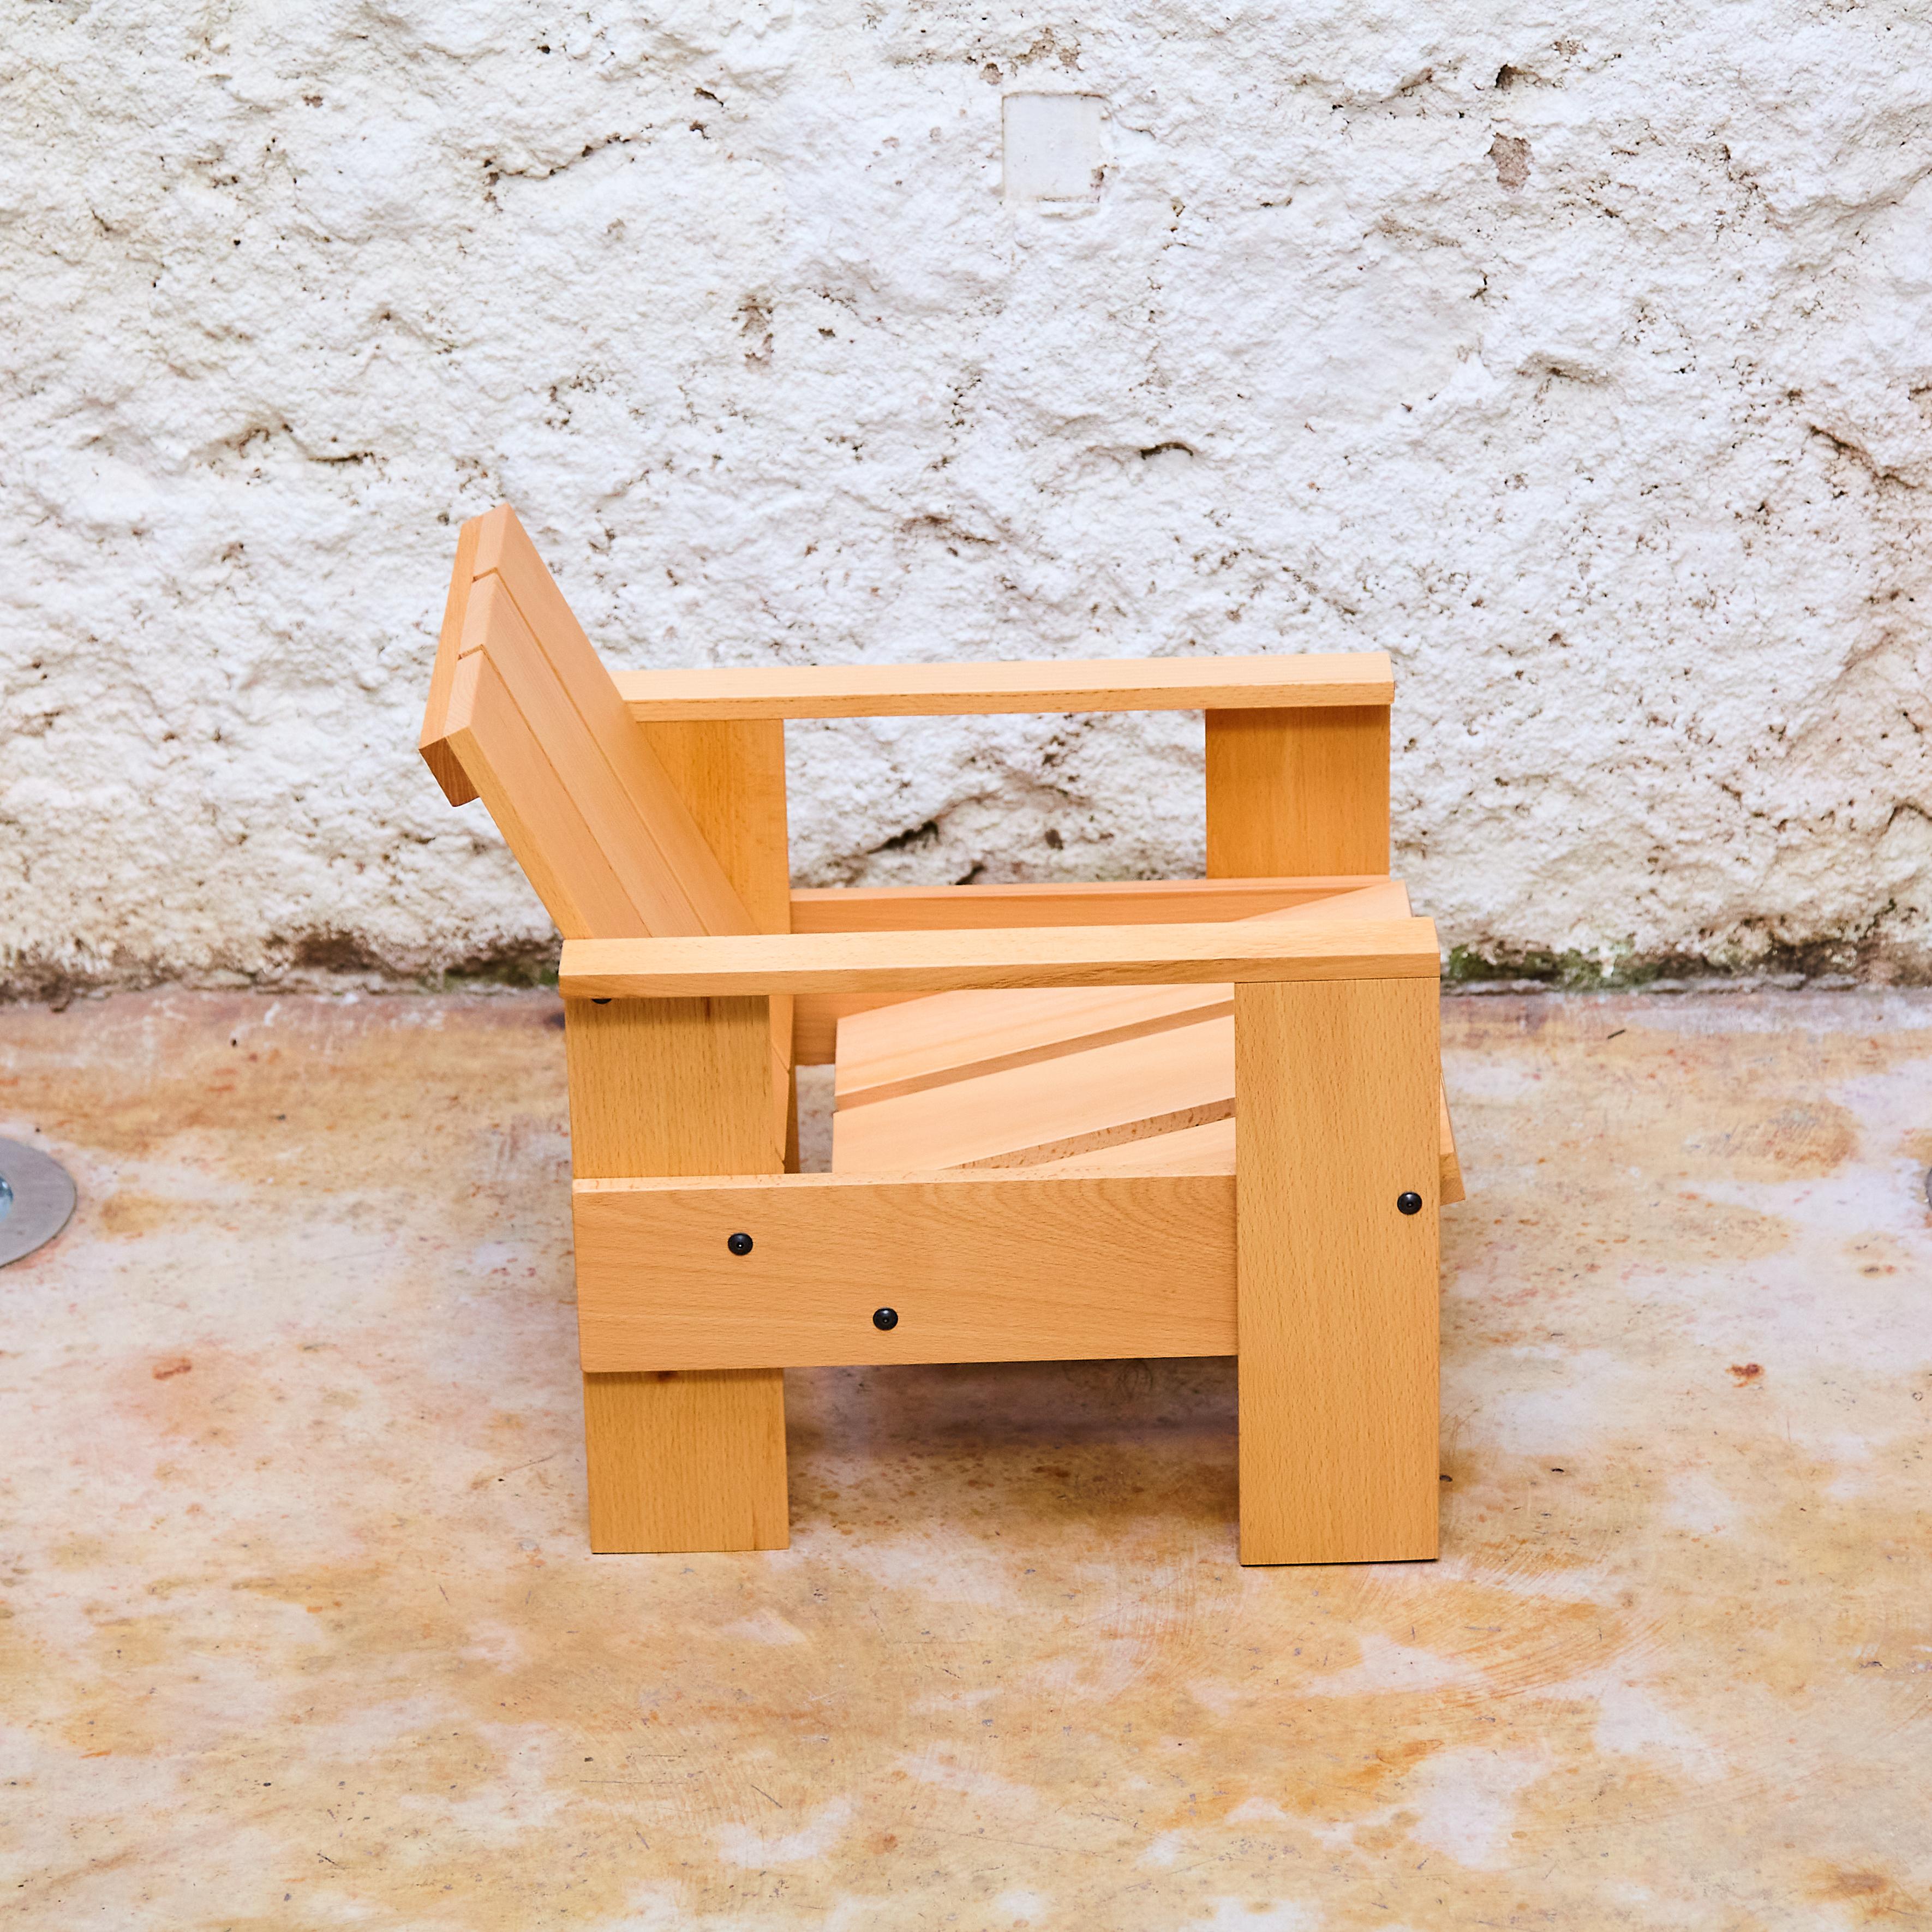 Mid-Century Modern Gerrit Rietveld Wood Child Armchair 'Crate' by Rietveld by Rietveld, circa 2005 For Sale